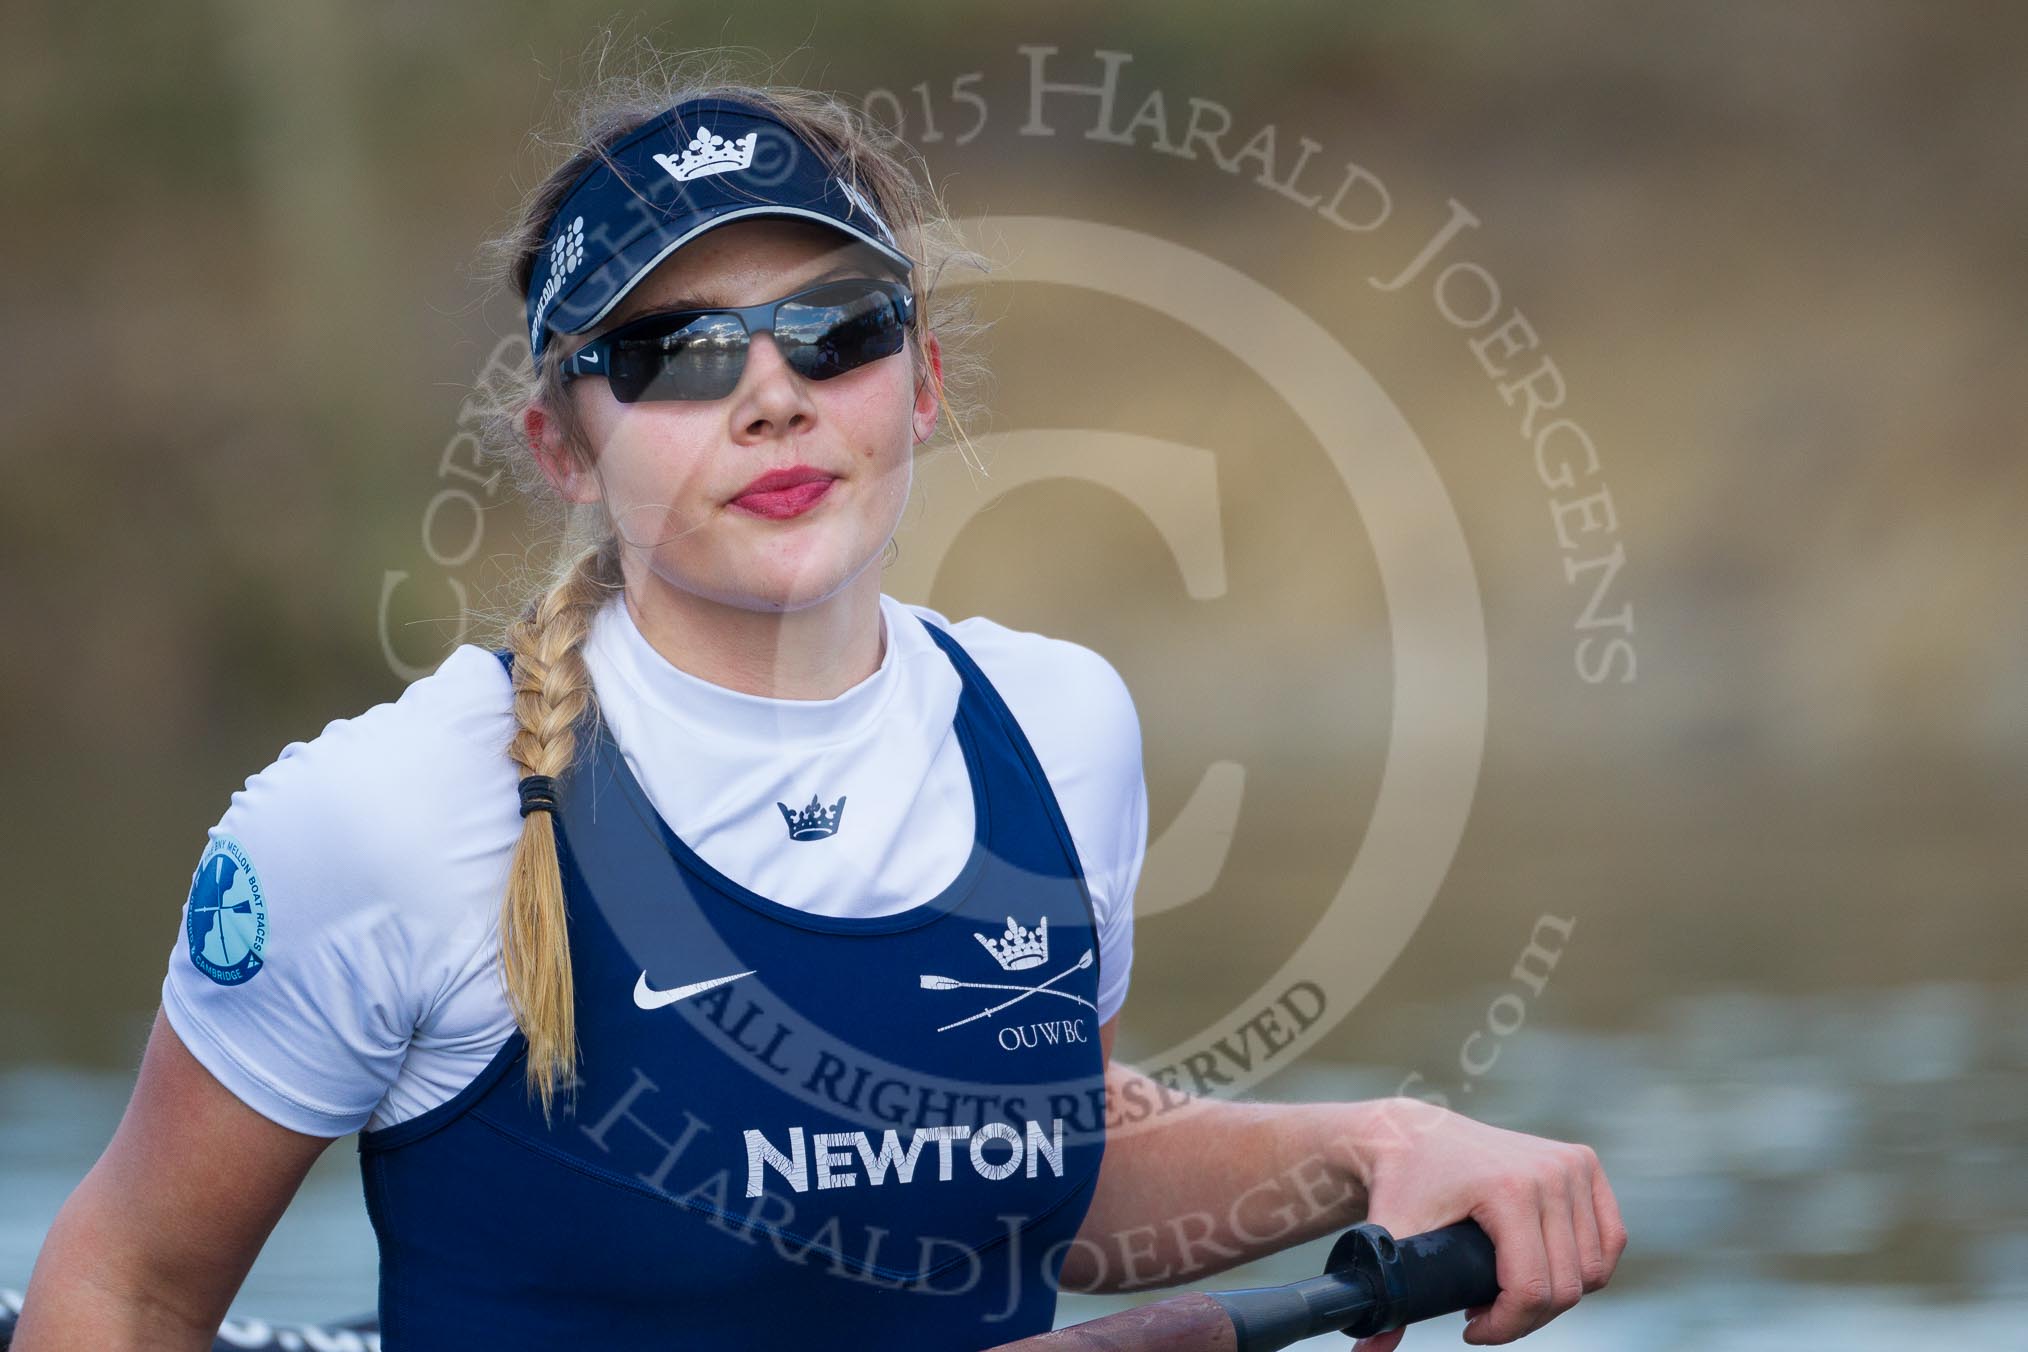 The Boat Race season 2015: OUWBC training Wallingford.

Wallingford,

United Kingdom,
on 04 March 2015 at 16:39, image #219